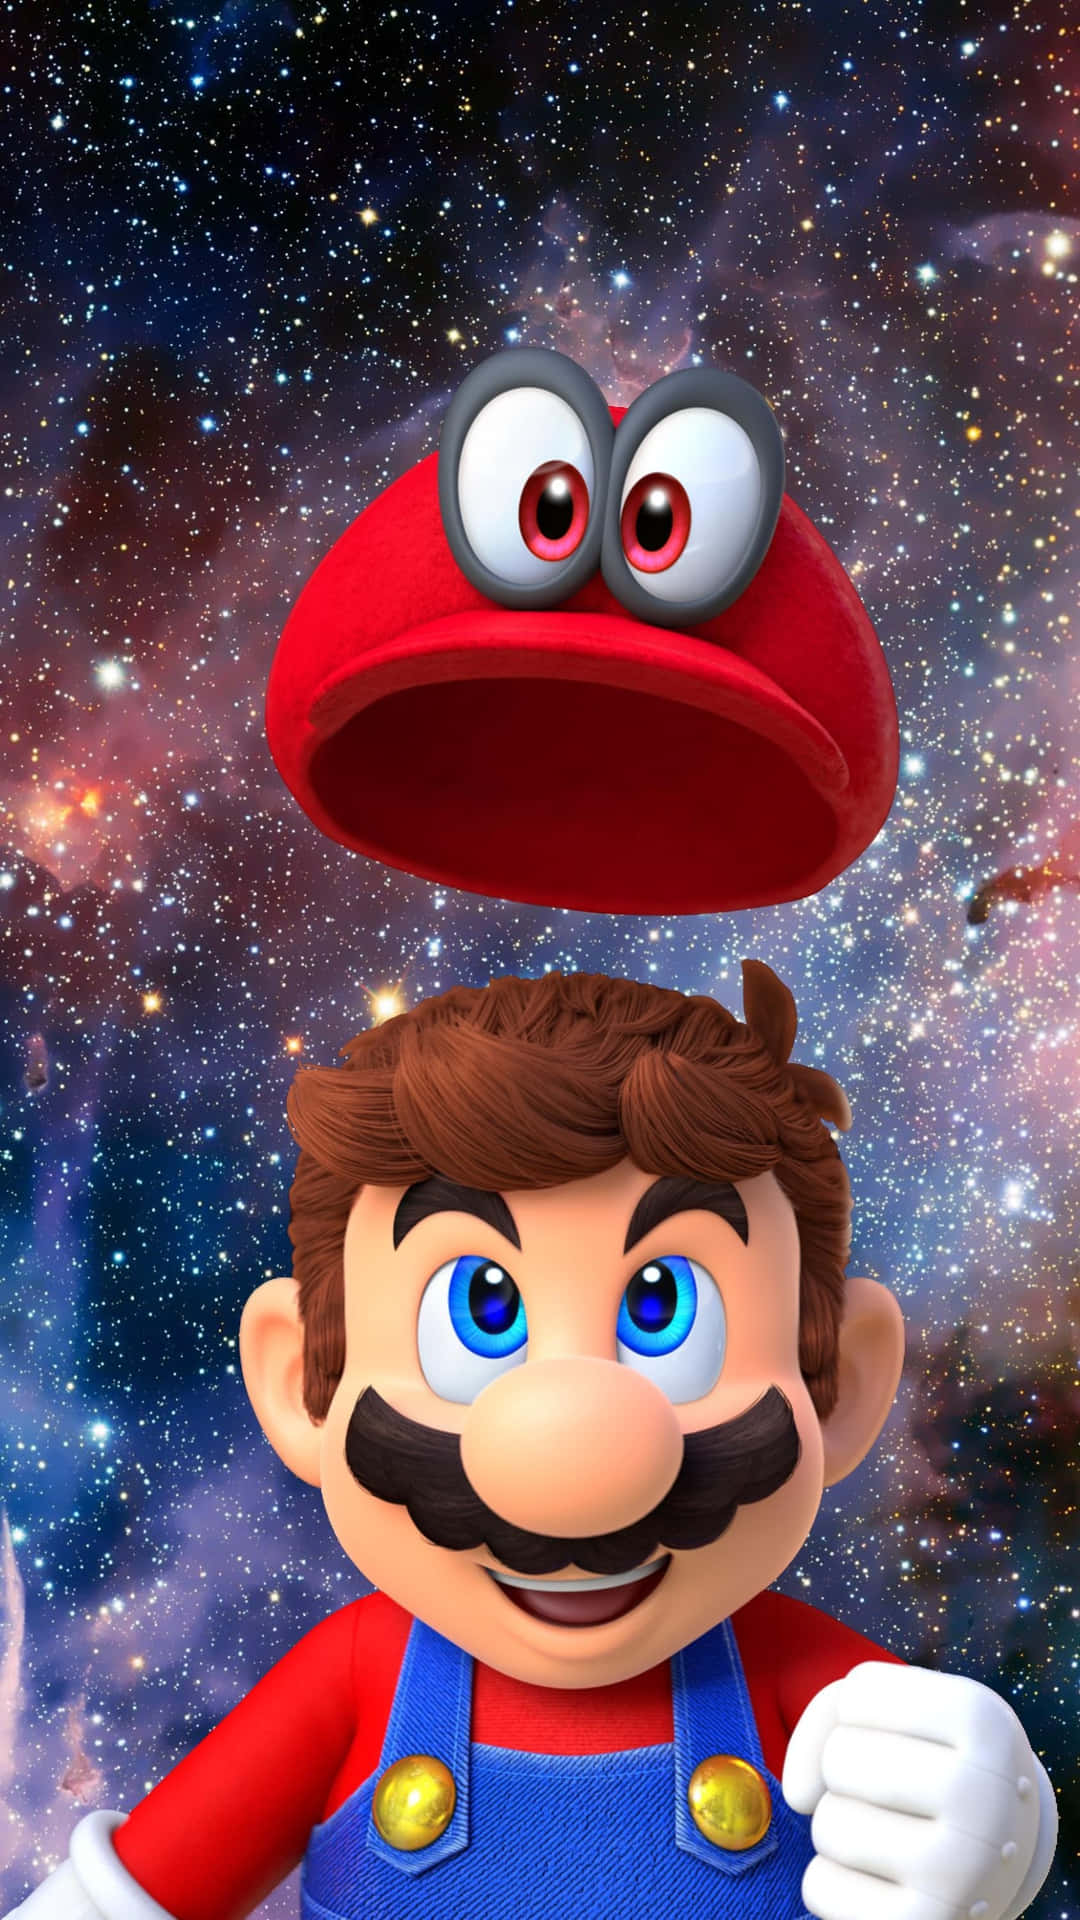 "Start your day right - play Super Mario on your iphone!" Wallpaper